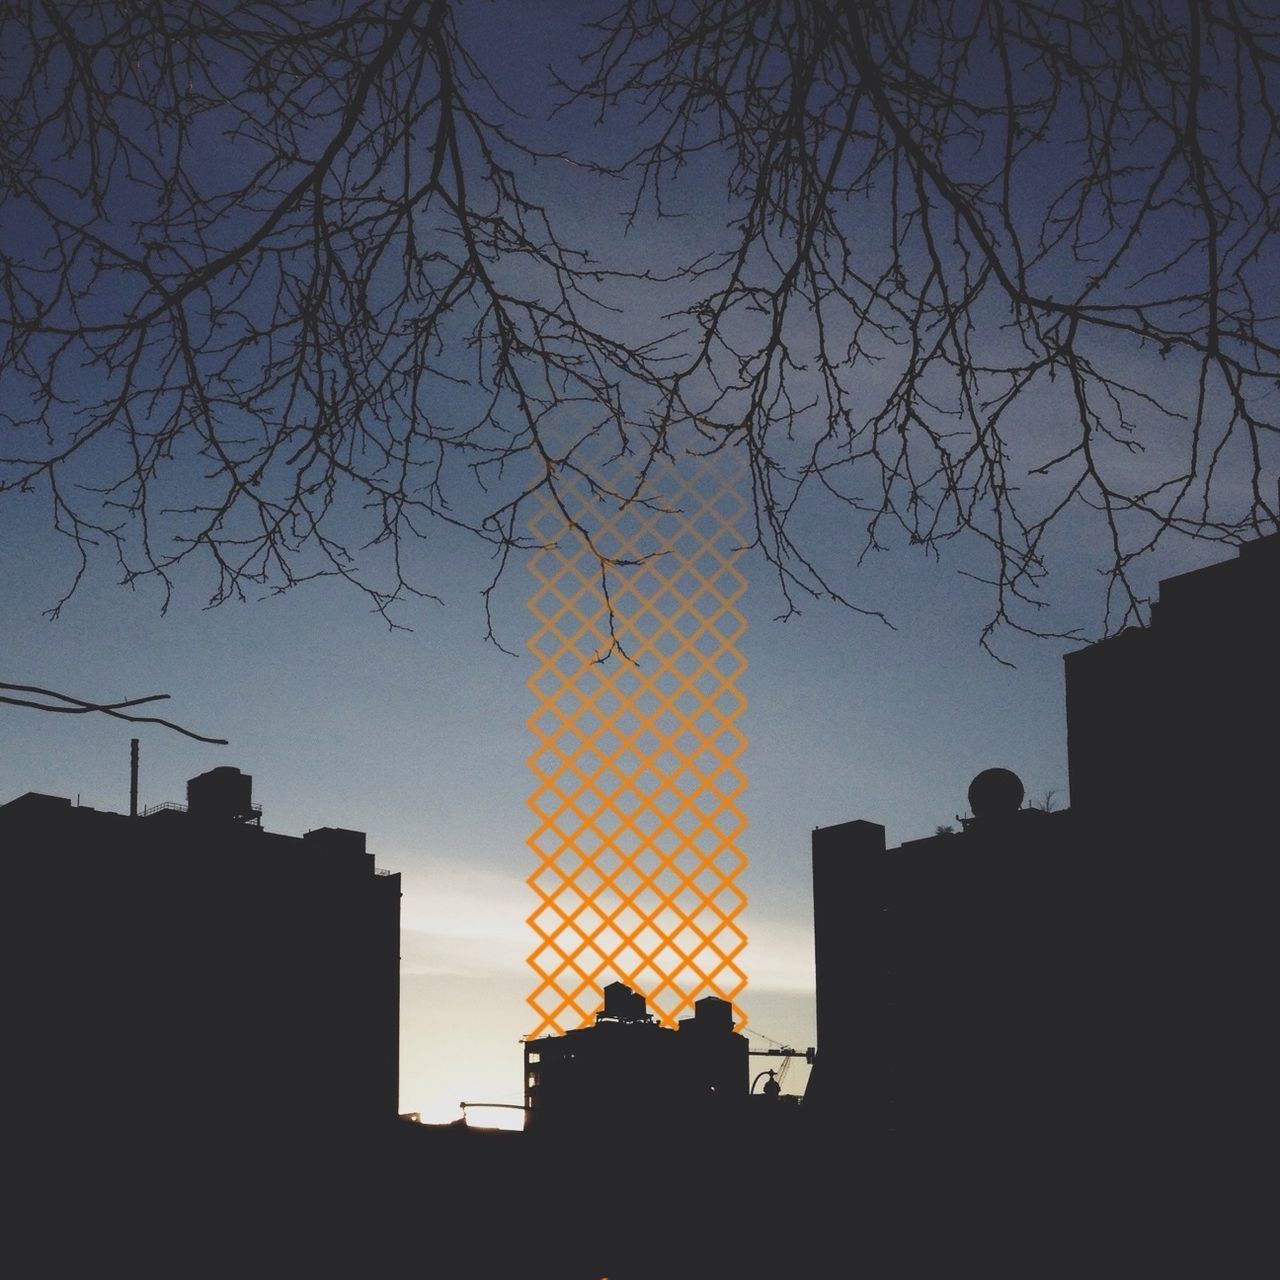 building exterior, architecture, built structure, silhouette, low angle view, city, building, clear sky, tree, bare tree, sunset, sky, tower, skyscraper, residential building, tall - high, residential structure, branch, no people, dusk